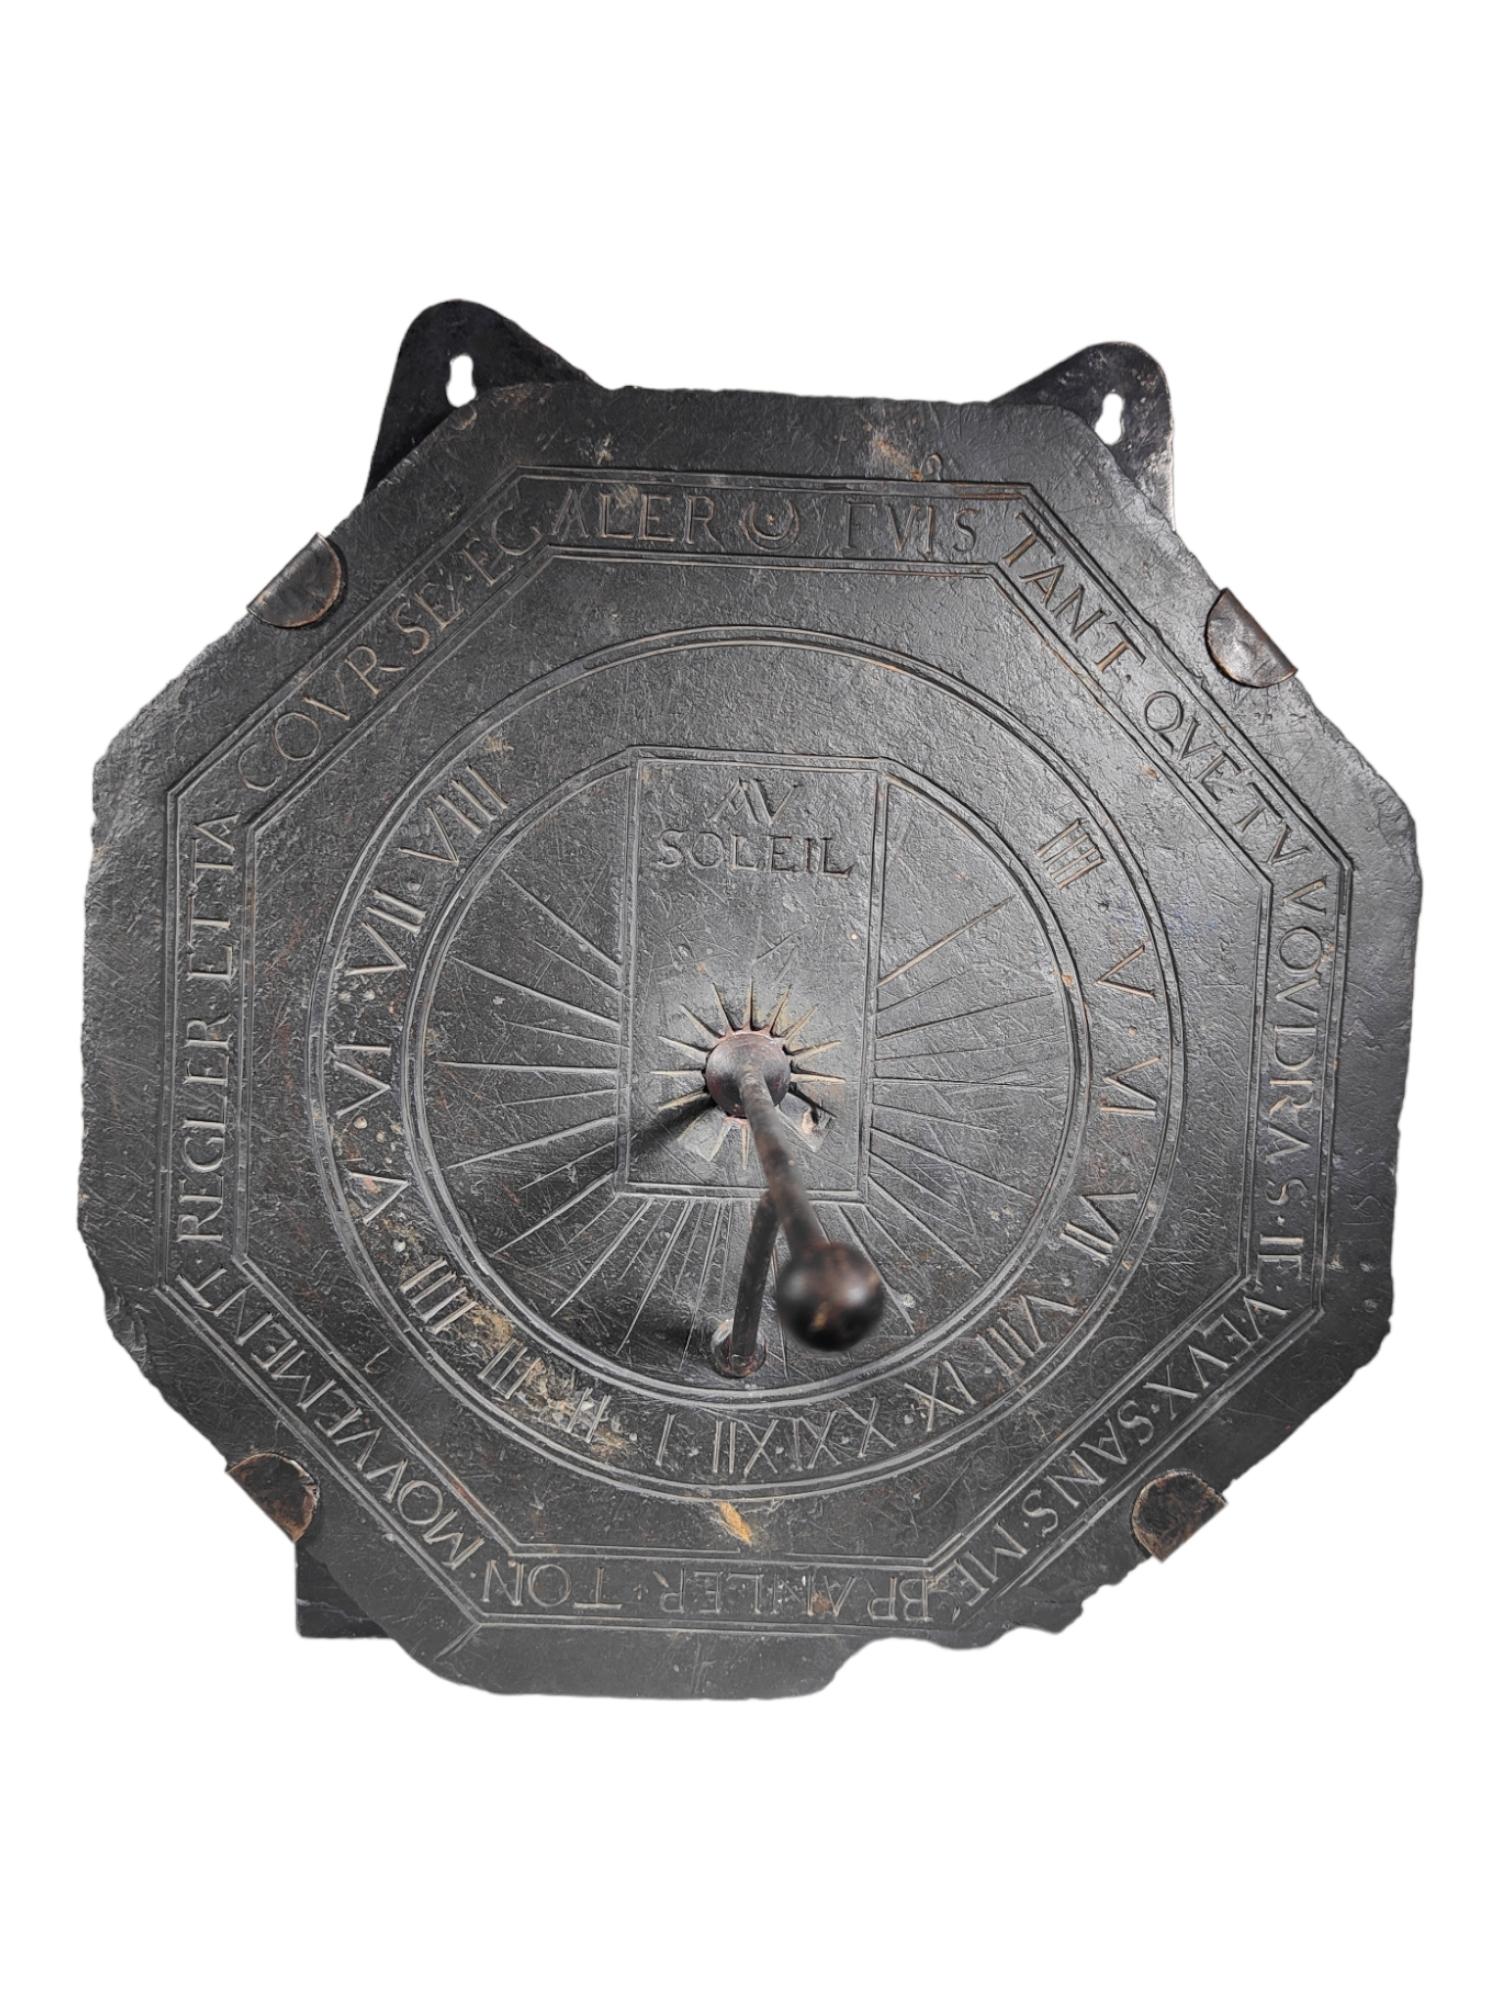 A Large 17th century French Slate Octagonal Sundial
With wrought iron gnomon and profusely engraved with latin letters.Size:39x39 cm.With latter hanging system.

The dial is set with a wrought iron gnomon which casts its shadow on the plate to